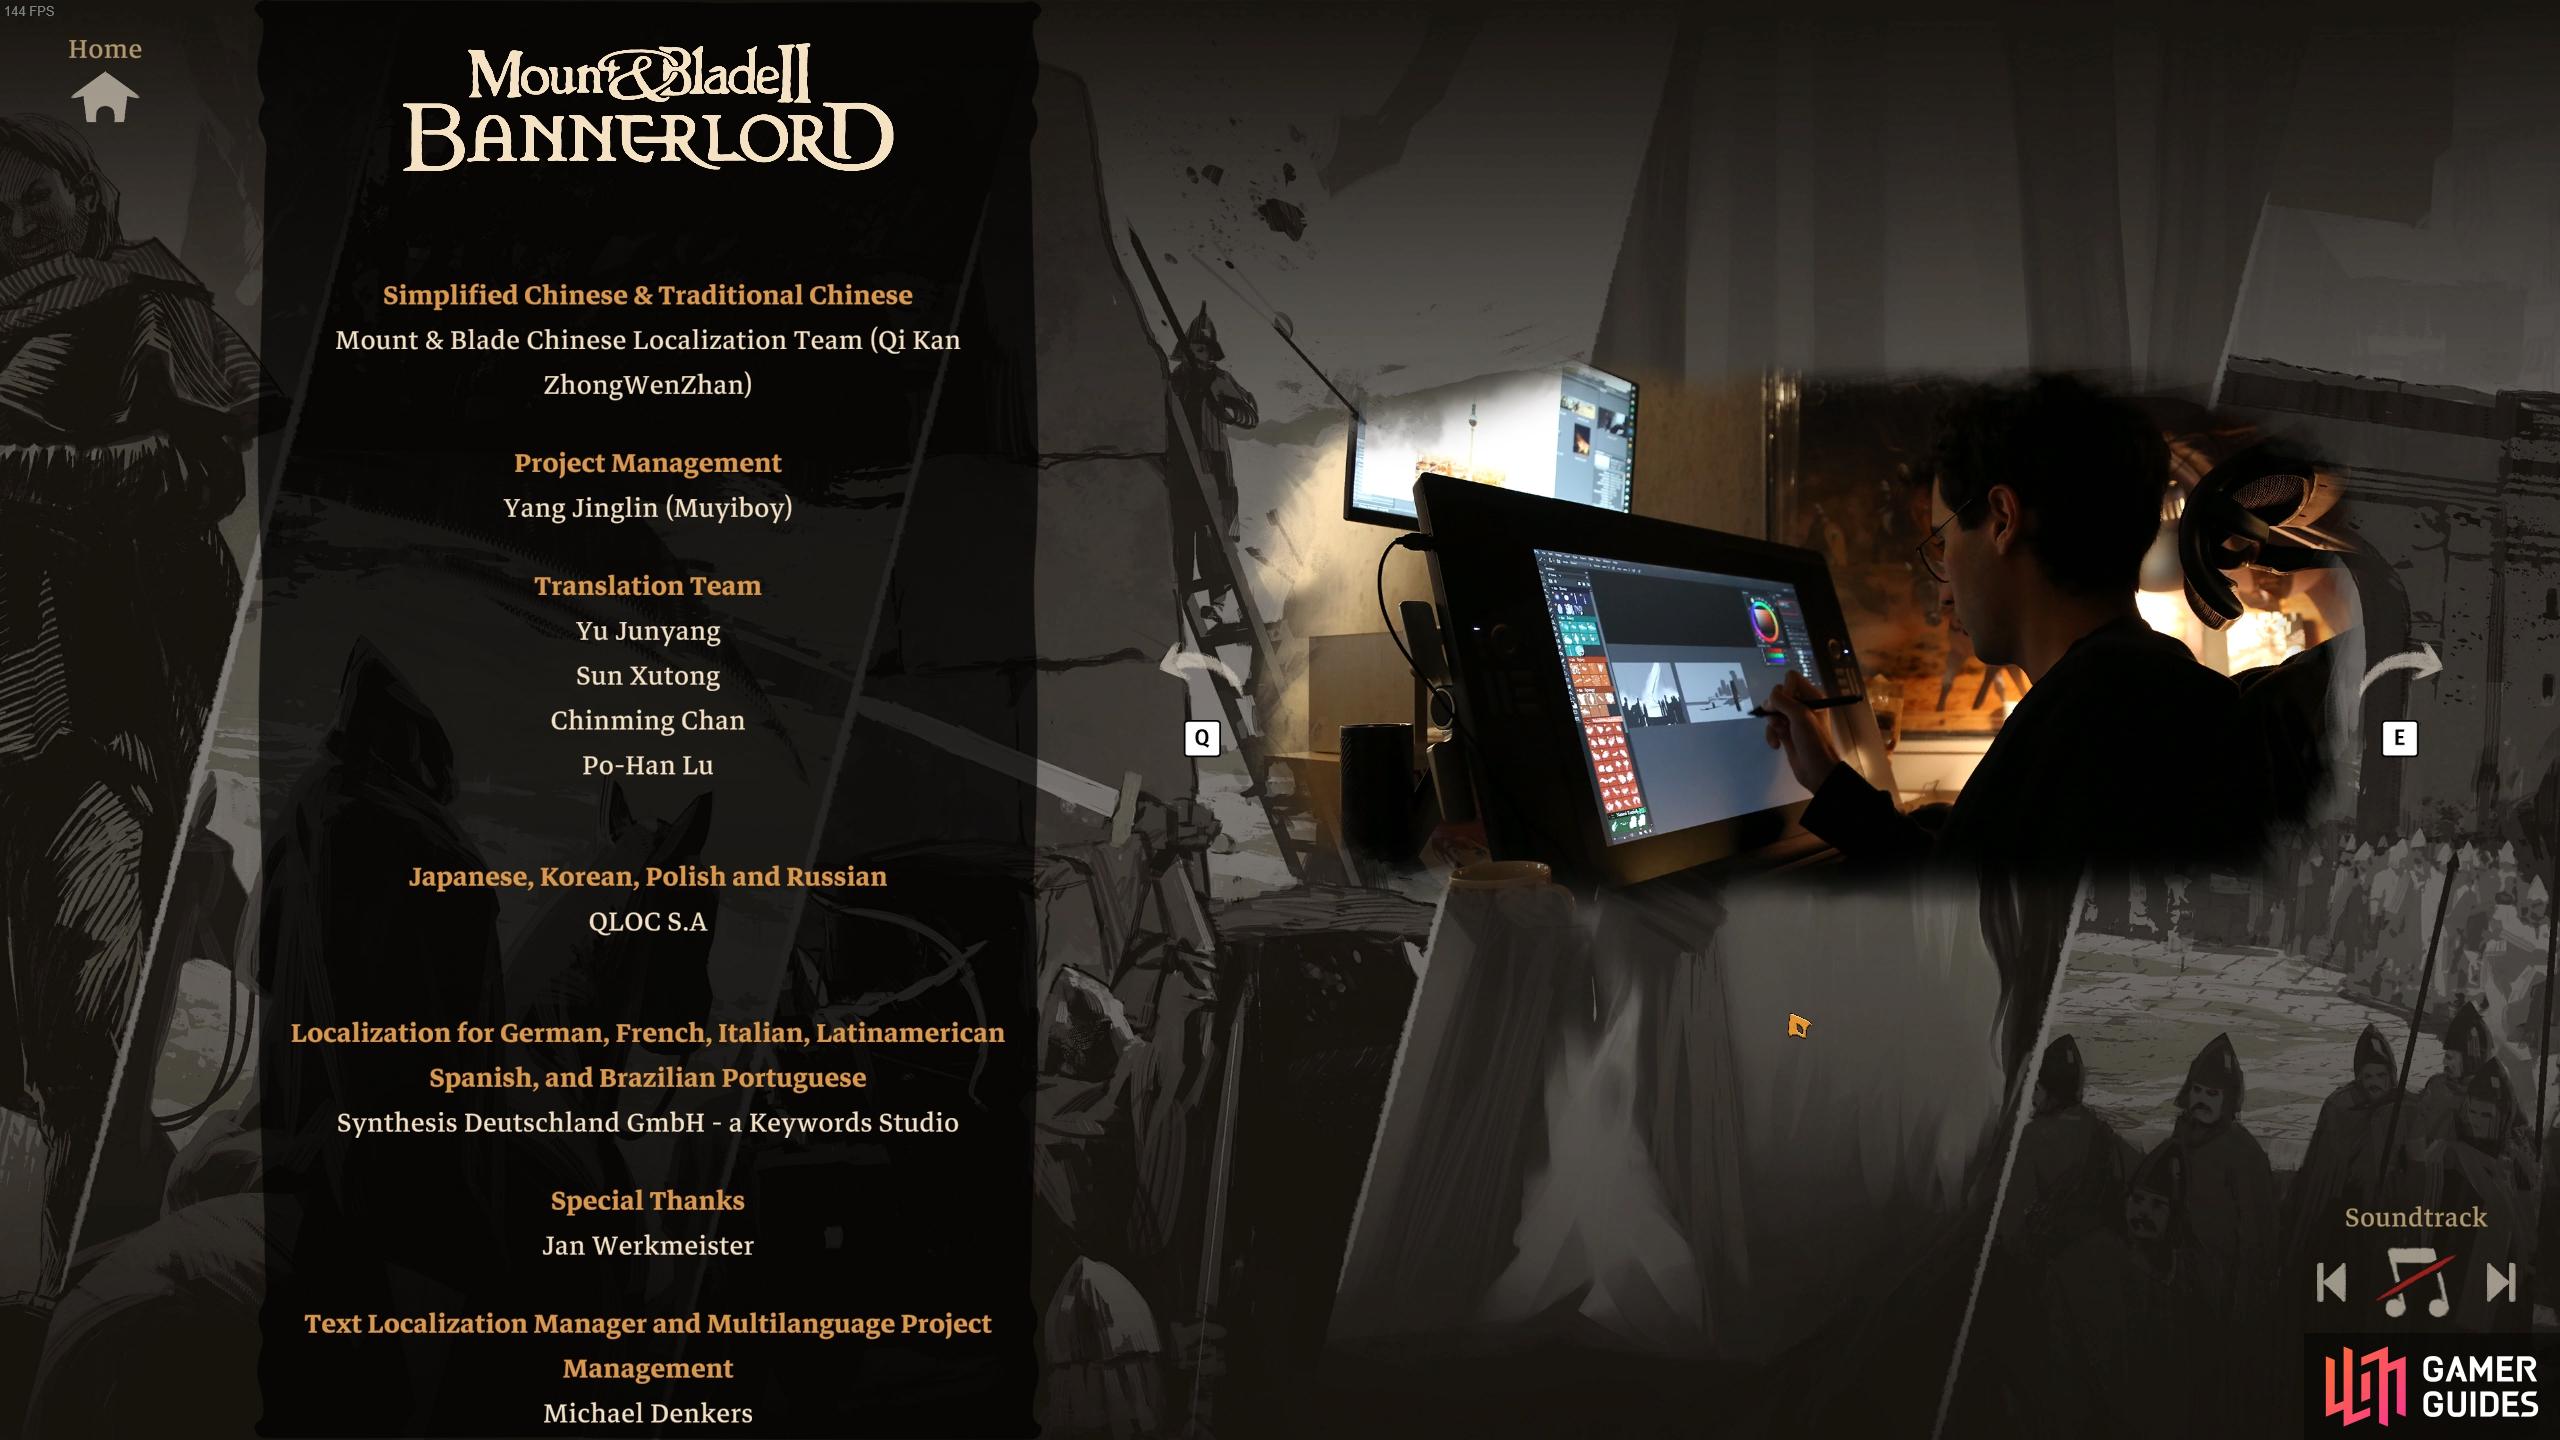 The credits feature all the names of people involved in the game, and quite a few pictures from the team as well.